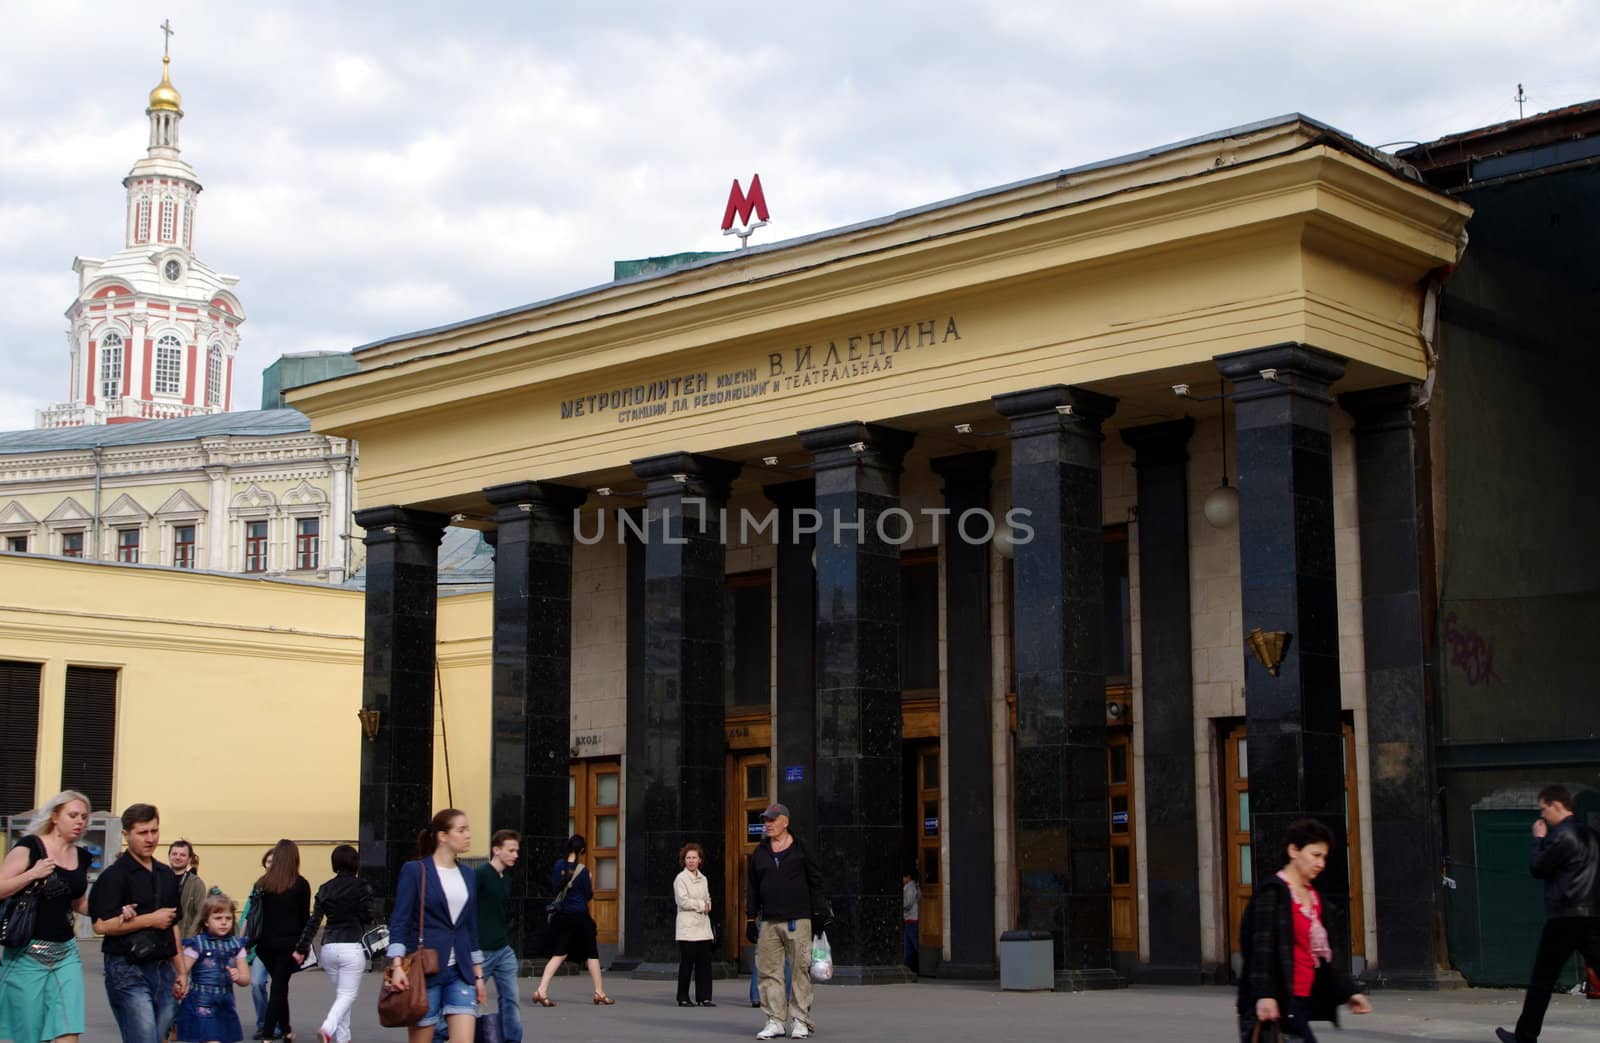 Moscow, Russia - June 14, 2010: Summer day. Peoples walk near the entrance of Teatral'naya metro station on June 14, 2010 in Moscow, Russia by Stoyanov